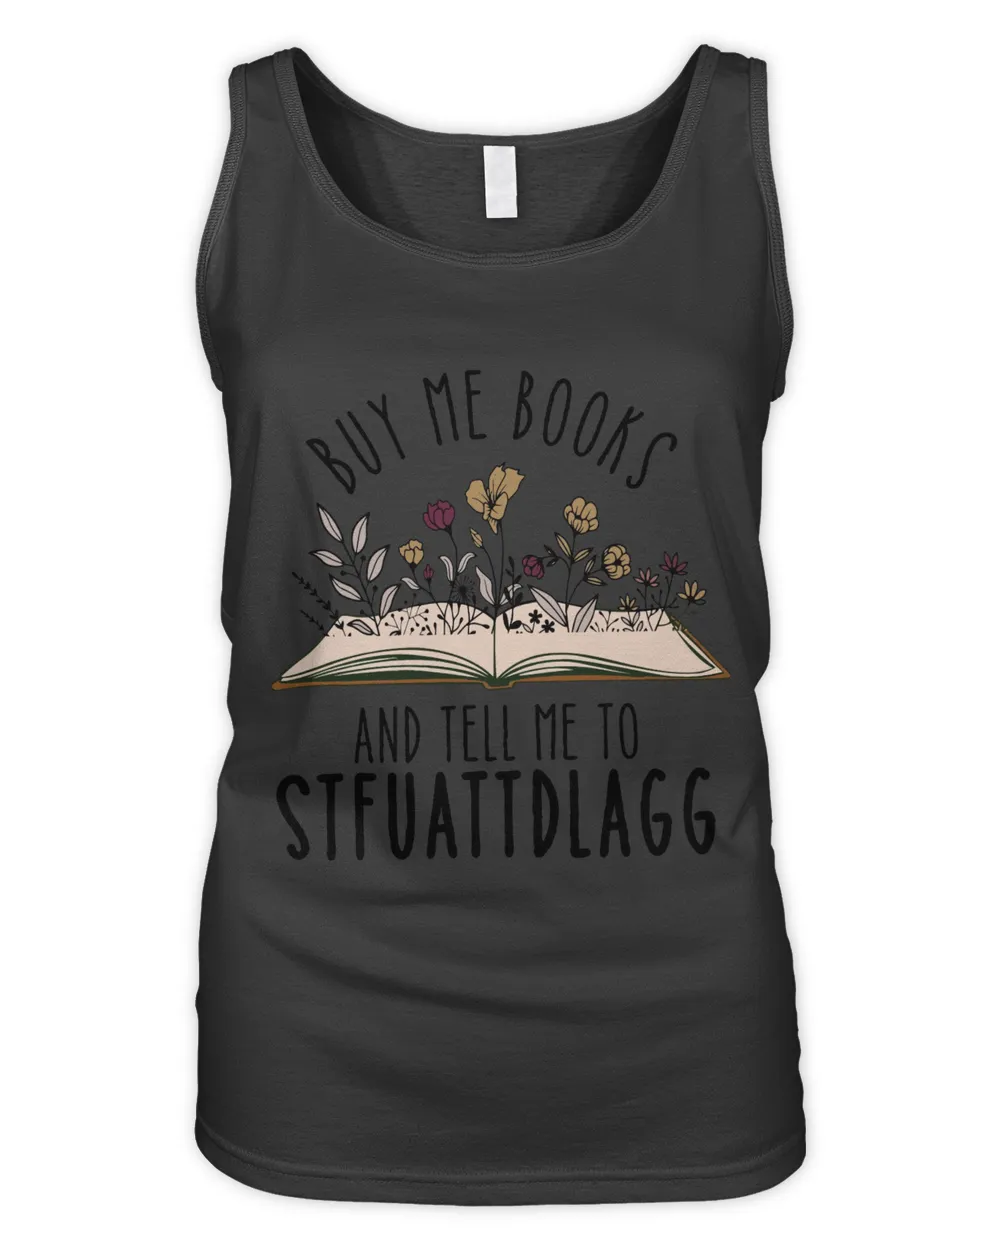 Books And Tell Me To Stfuattdlagg Shirt